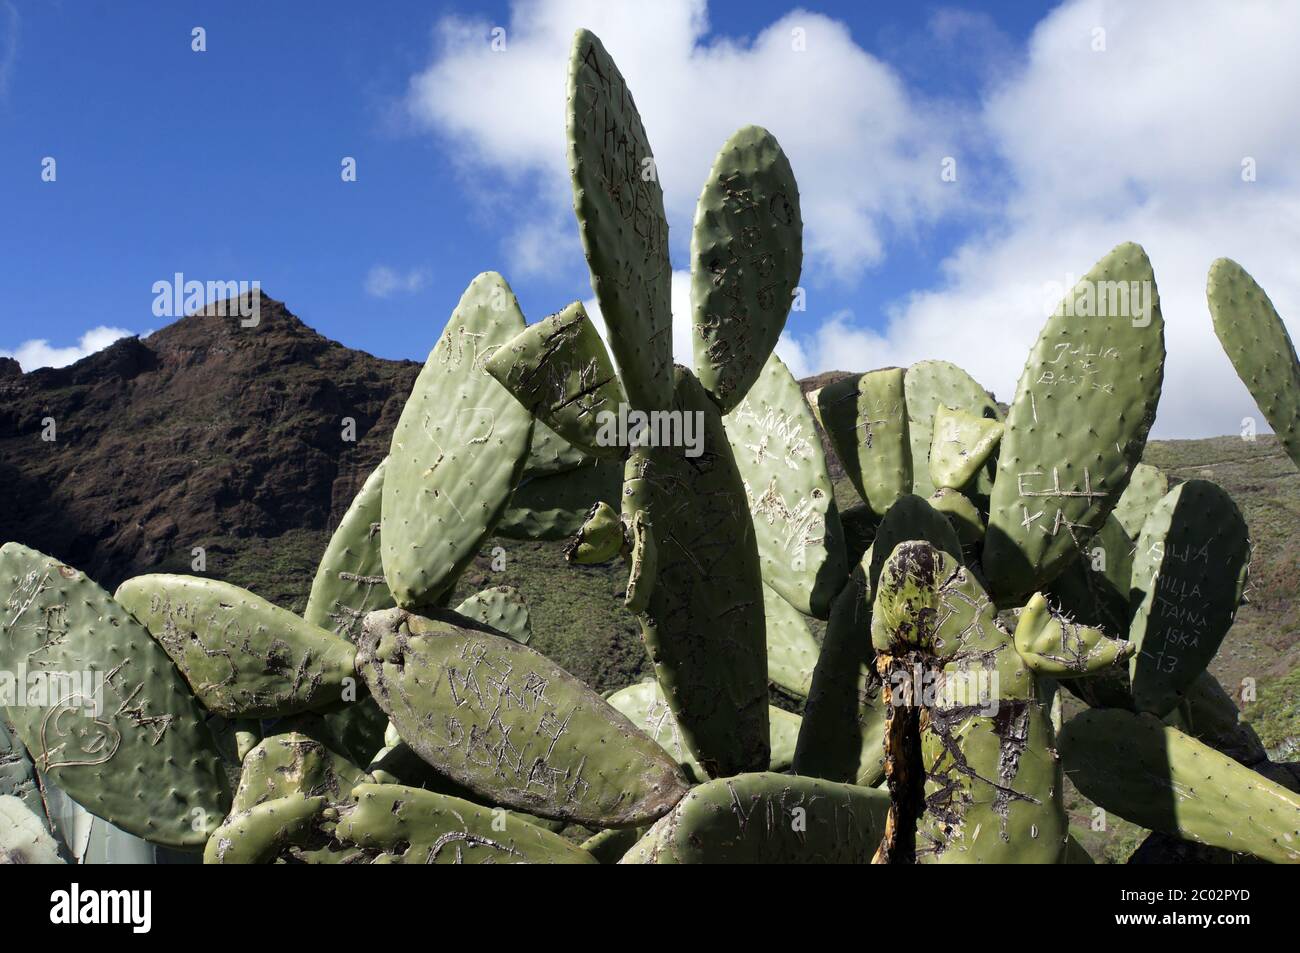 prickly pear Stock Photo